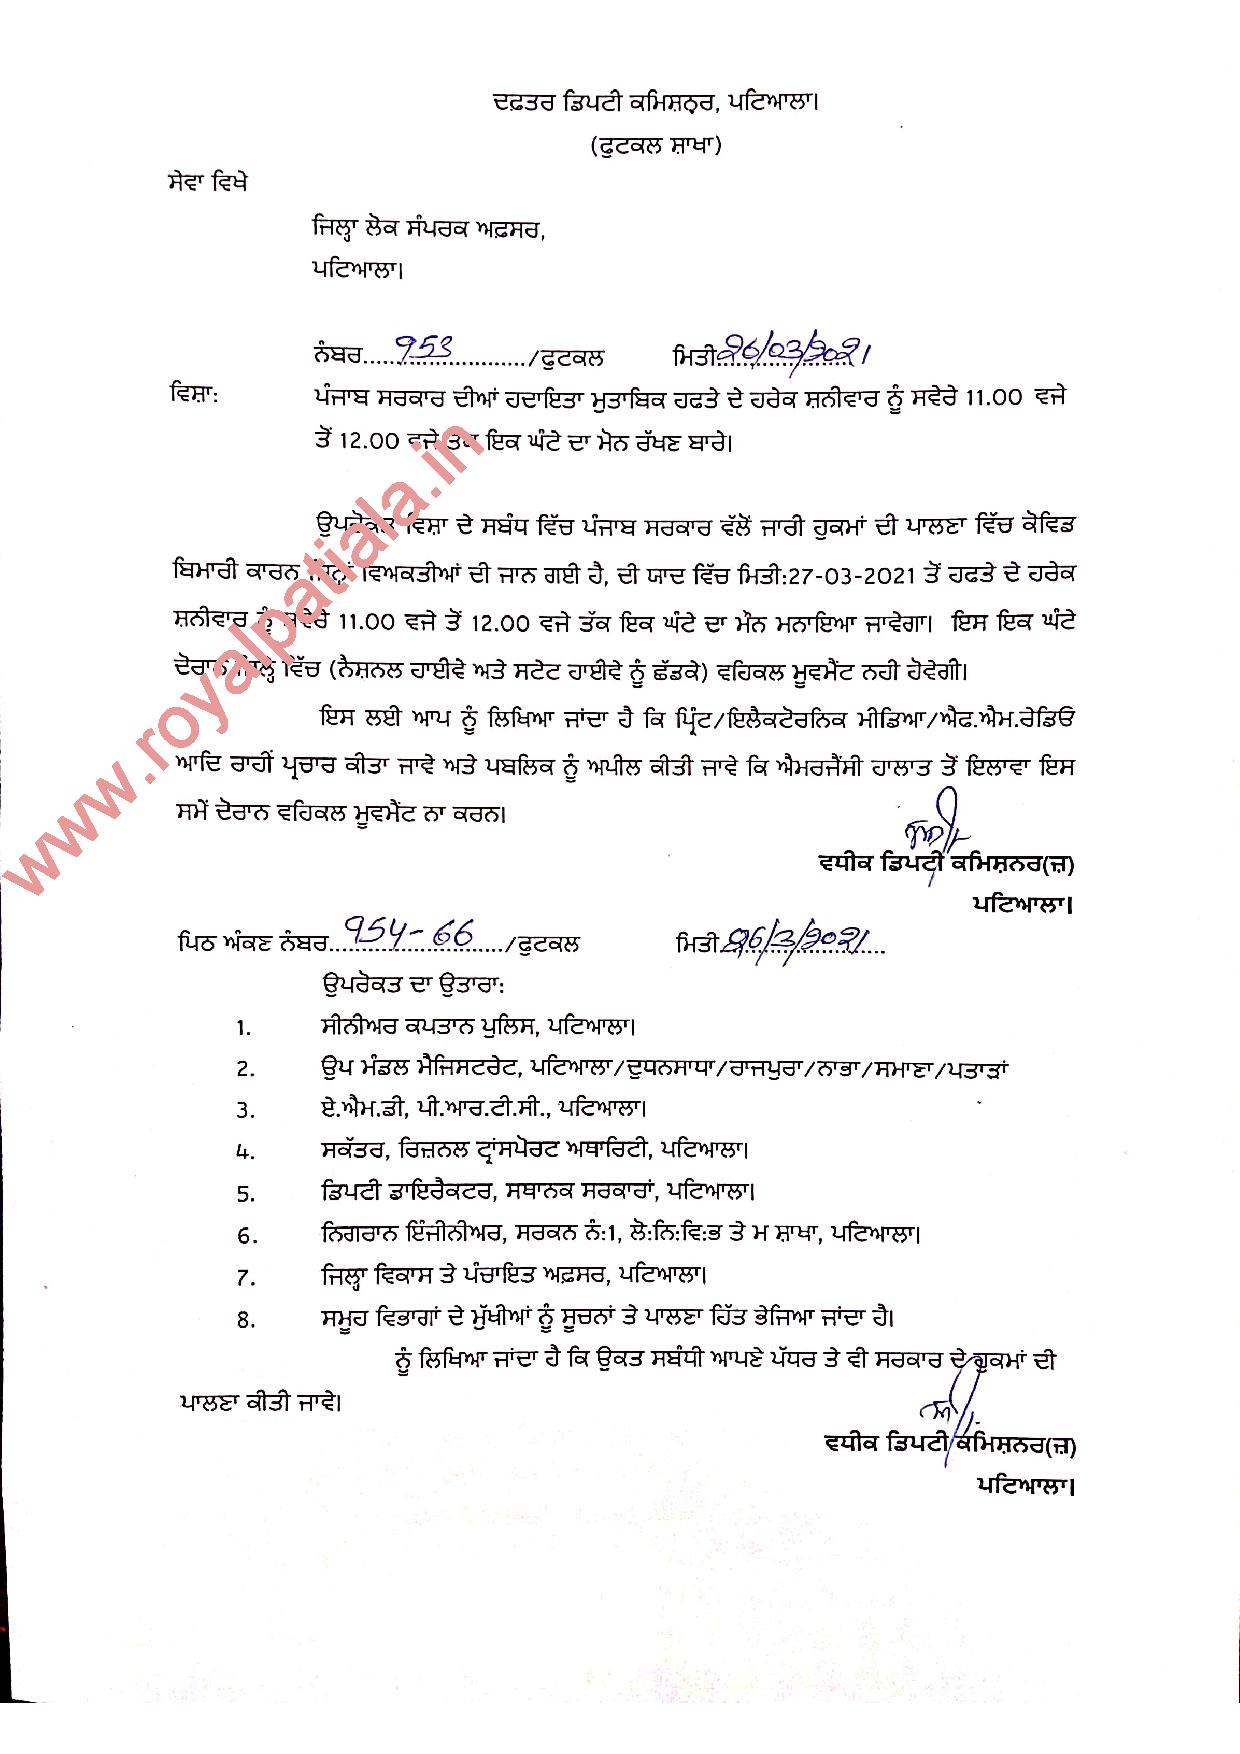 DC Patiala issues orders for Saturday